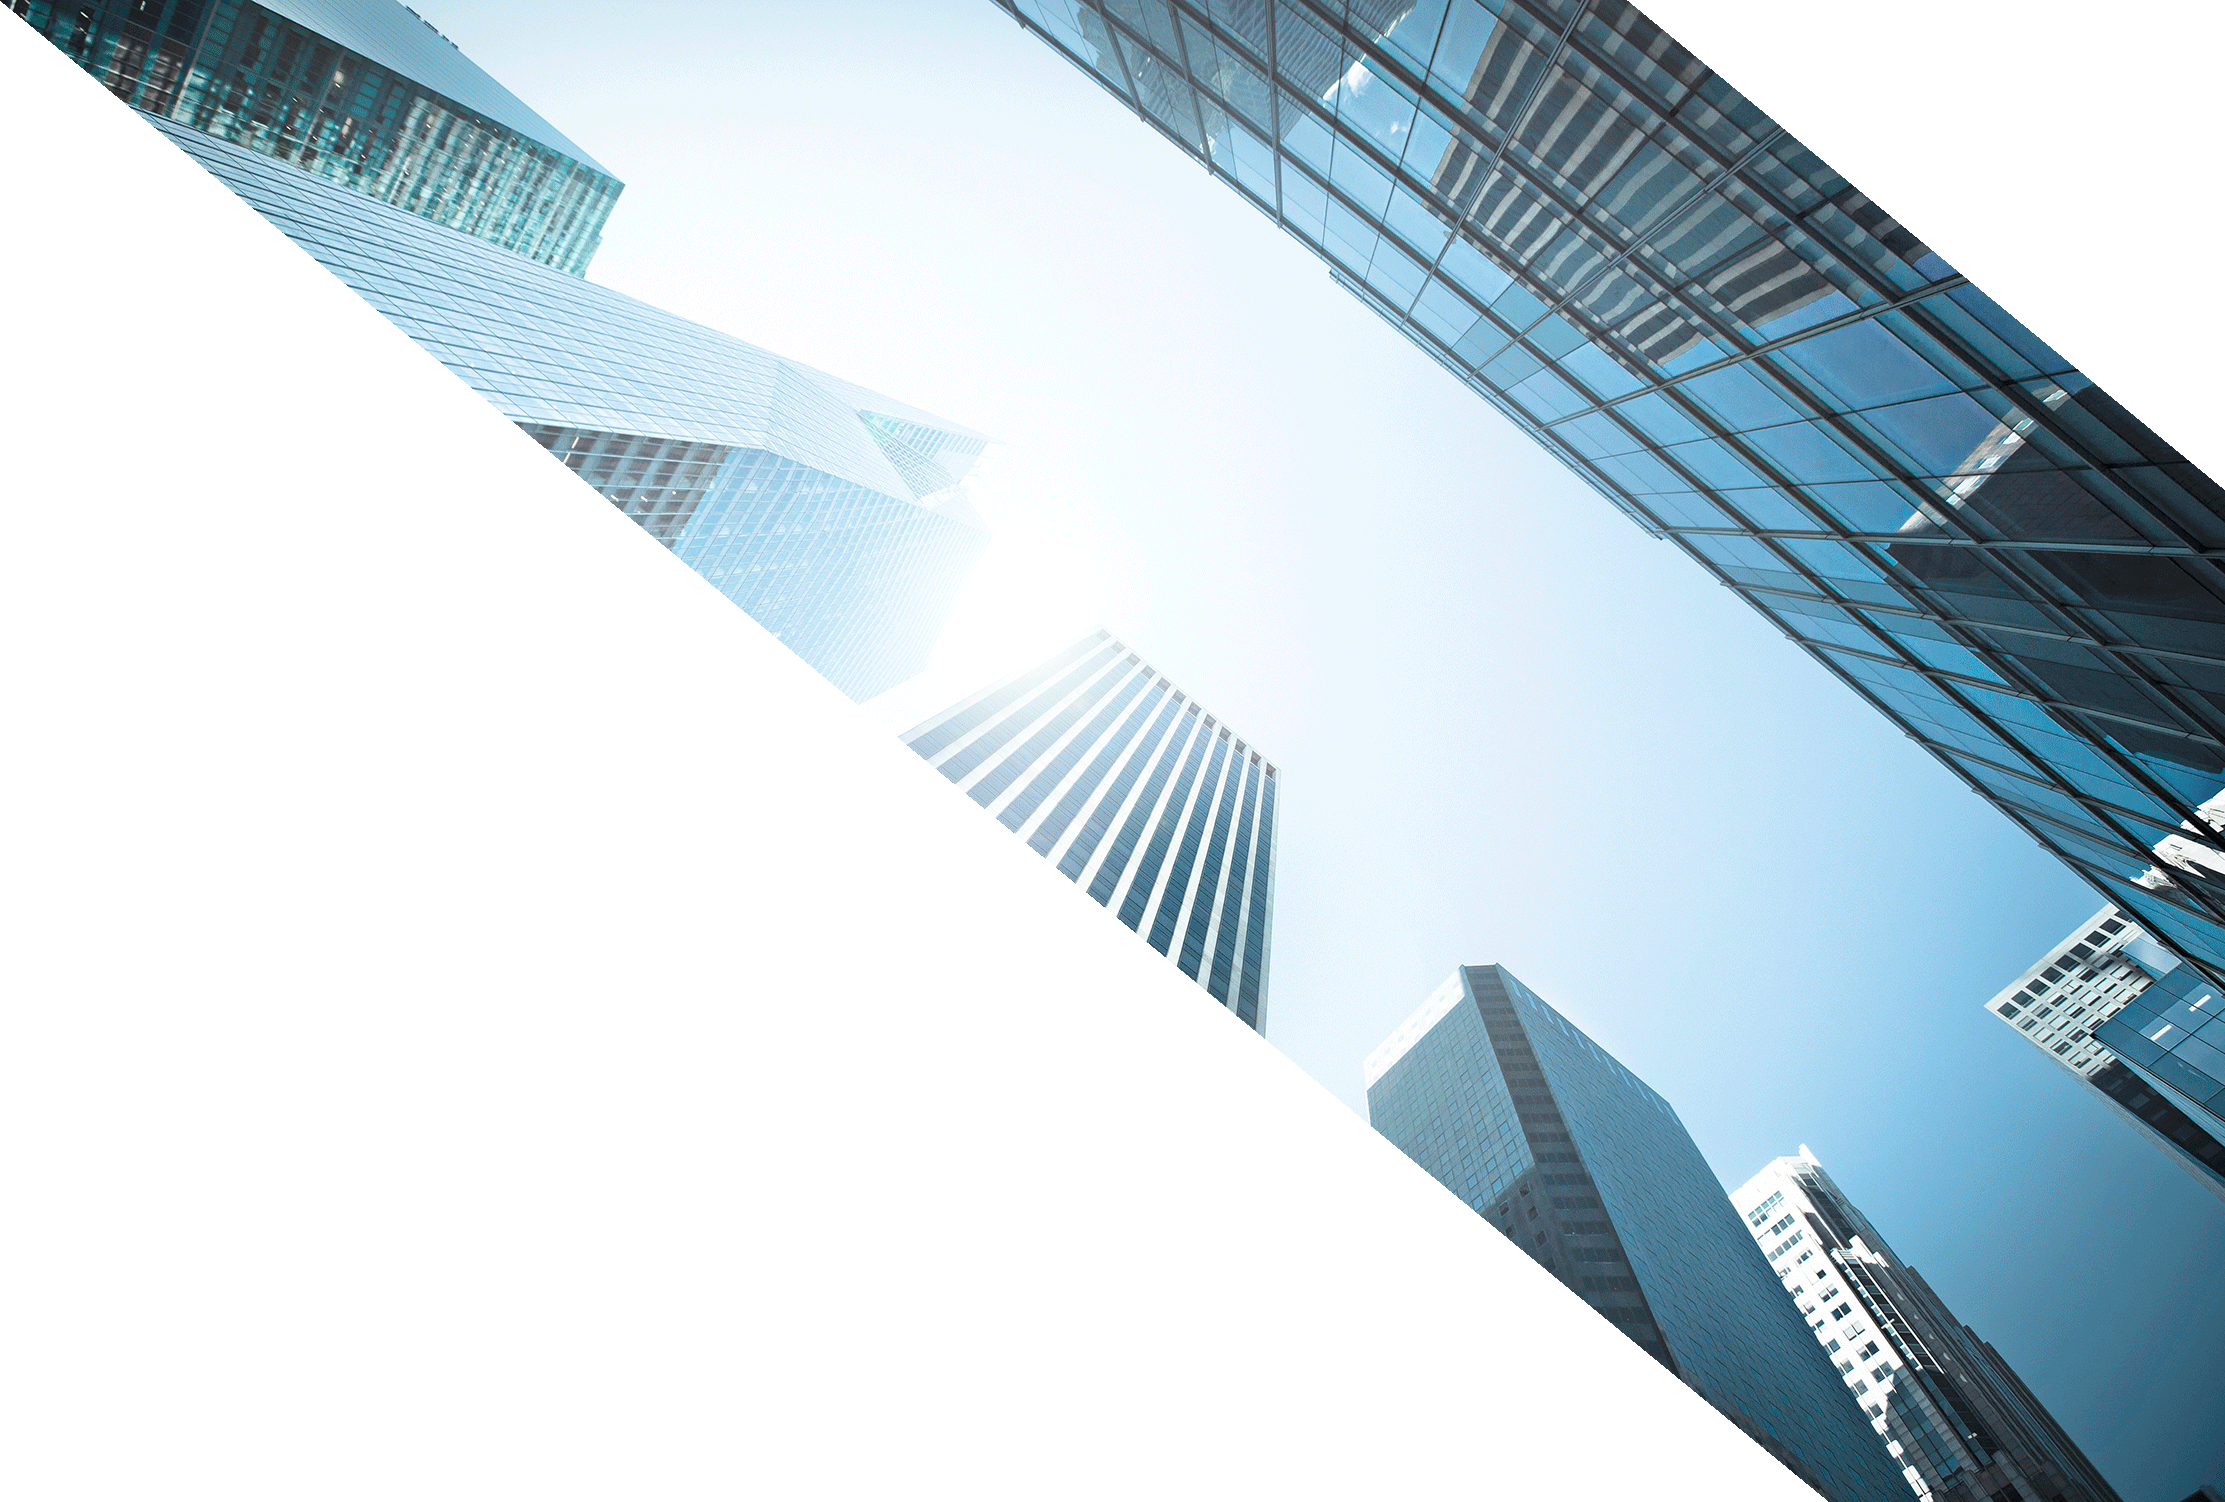 Looking at the sky between two tall buildings representing the financial solutions offered by the team at Continental.